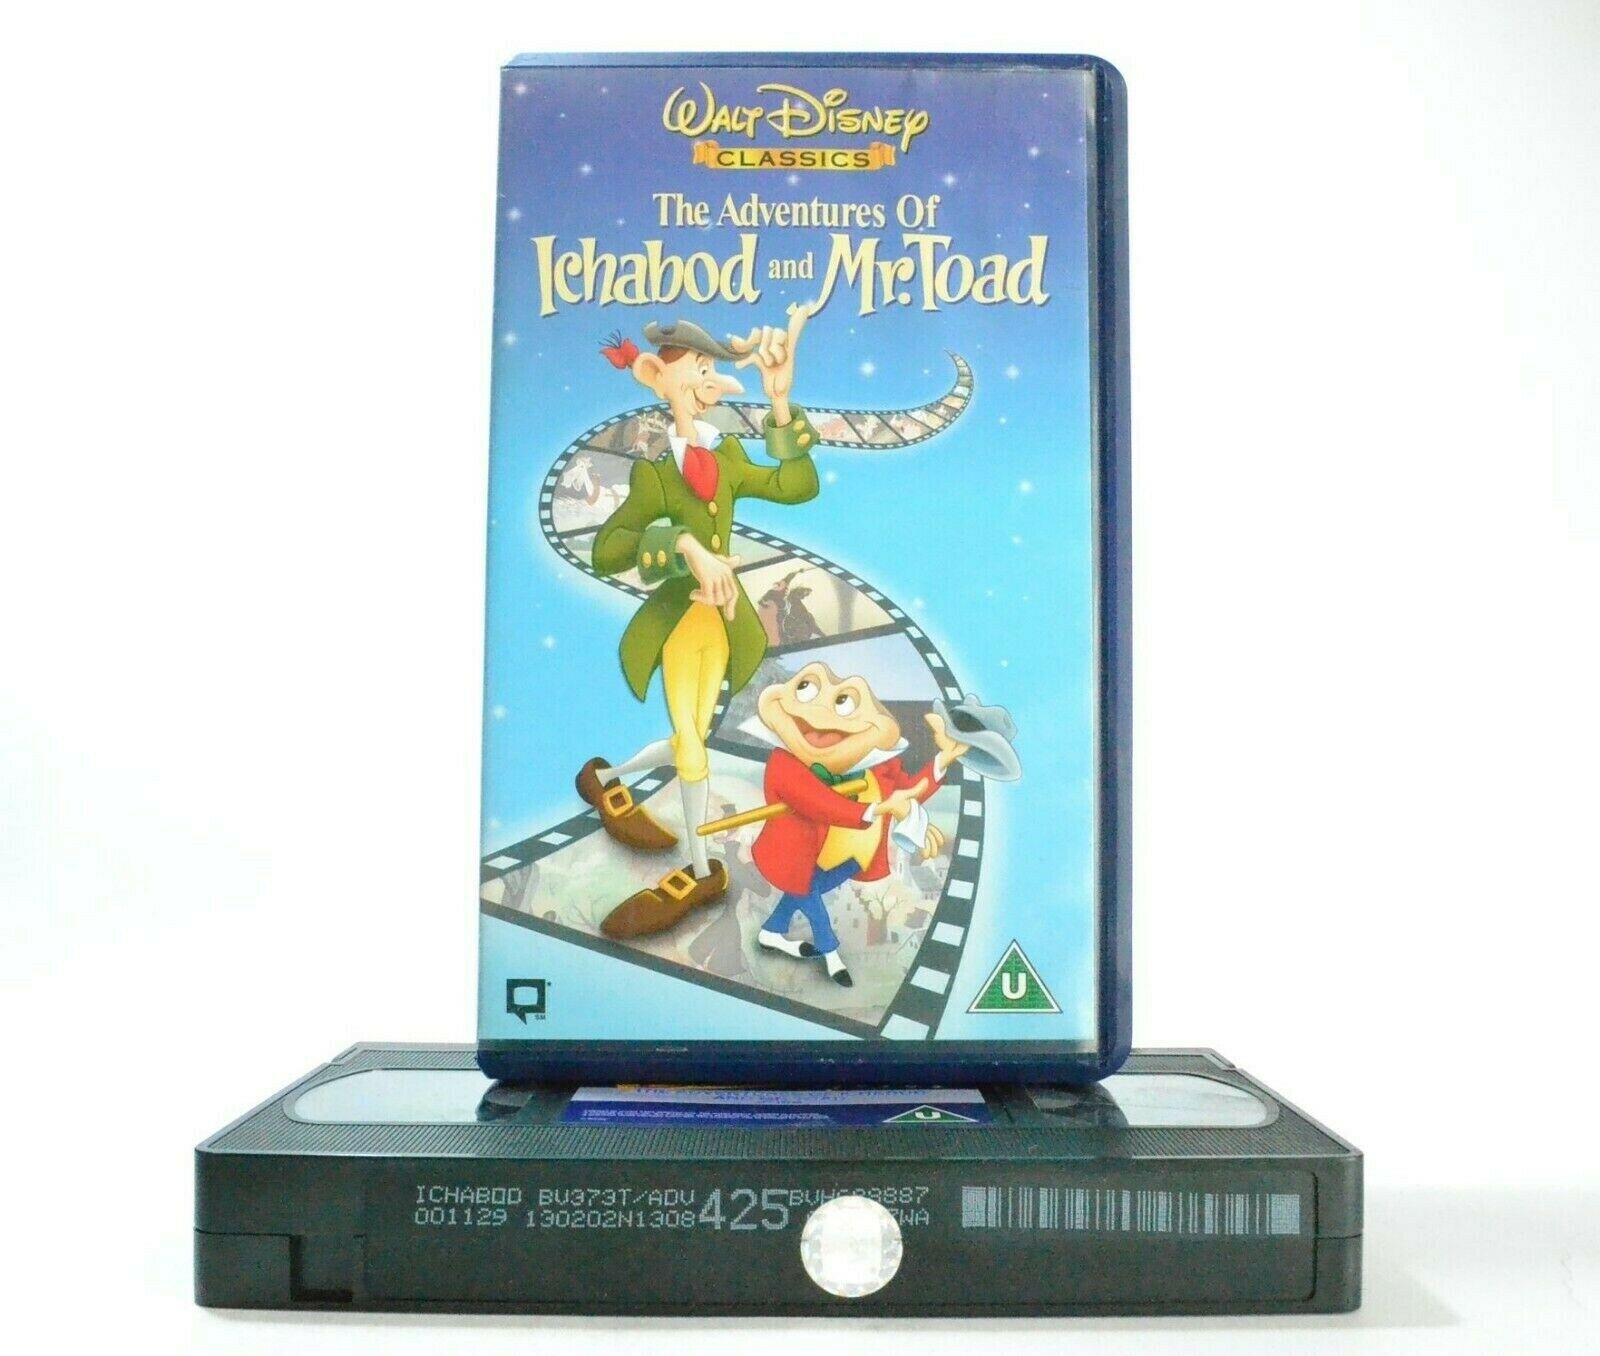 The Adventures Of Ichabod And Mr.Toad, Walt Disney Classic